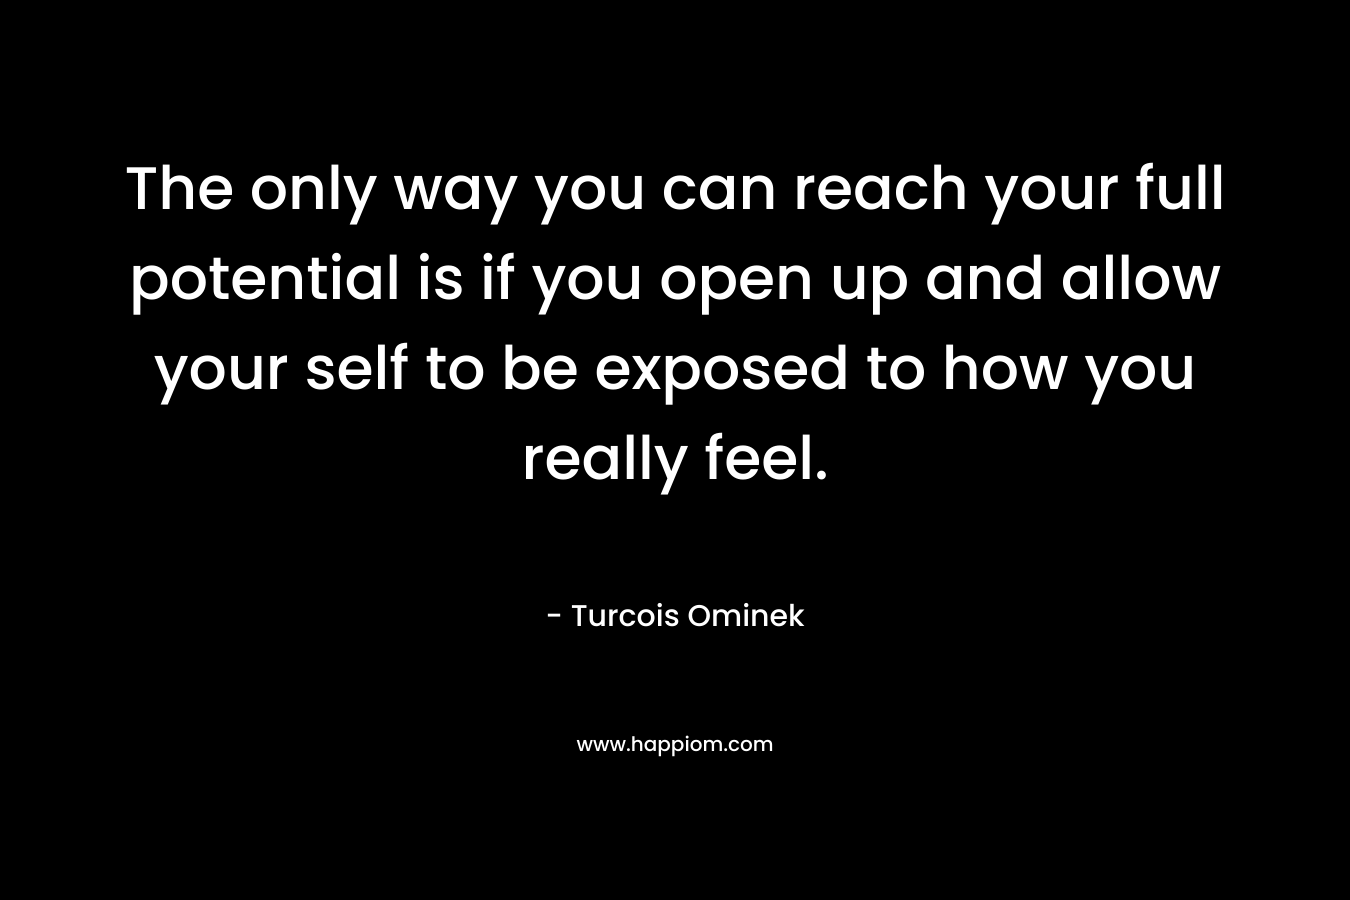 The only way you can reach your full potential is if you open up and allow your self to be exposed to how you really feel.